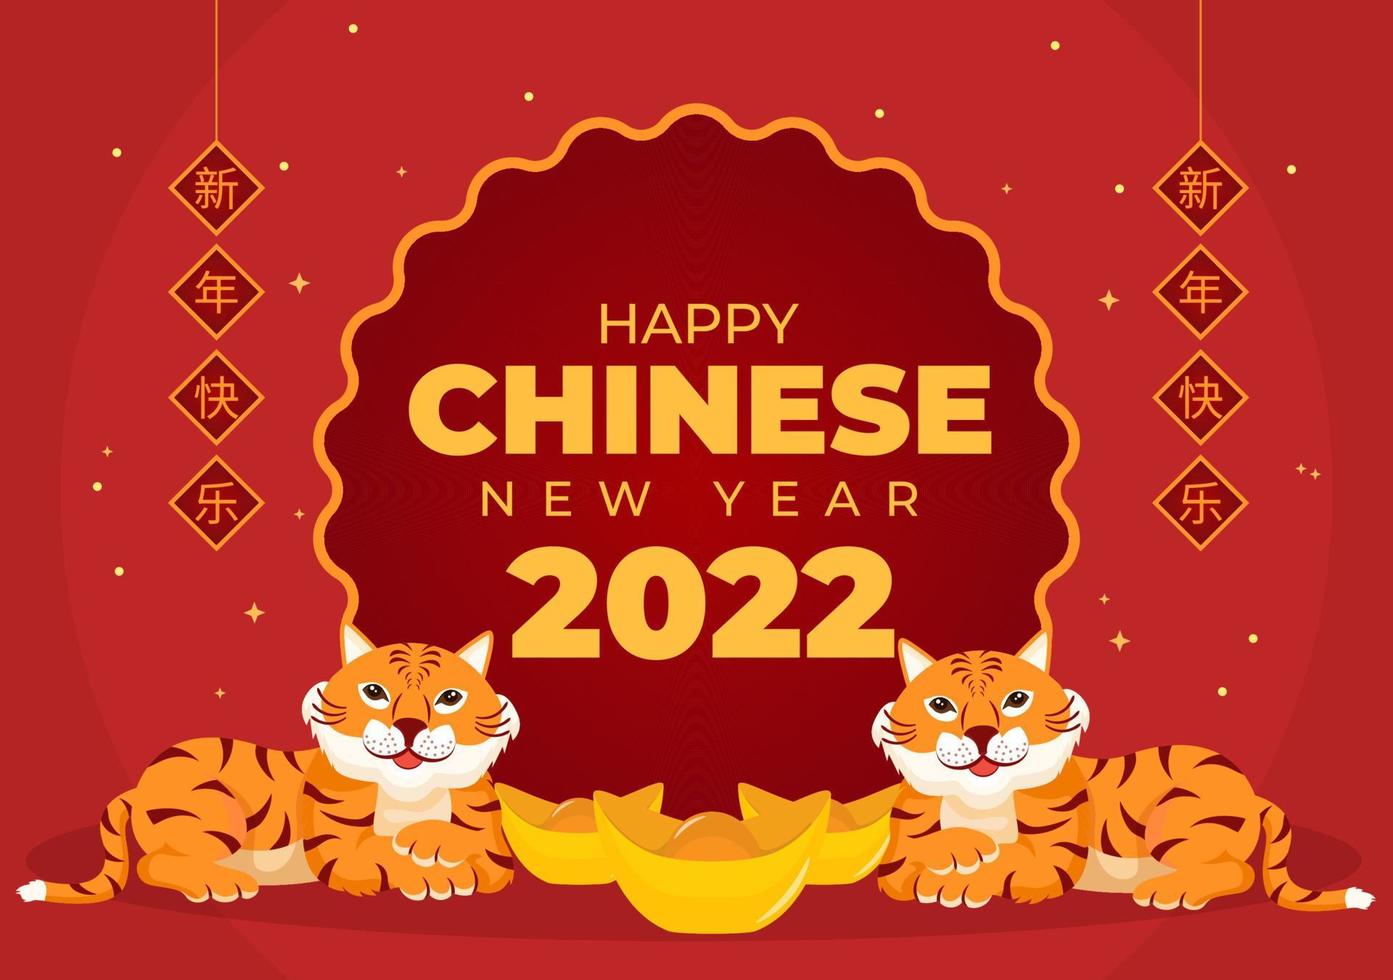 Happy Chinese New Year 2022 with Zodiac Cute Tiger and Flower on Red Background for Greeting Card, Calendar or Poster in Flat Design Illustration vector